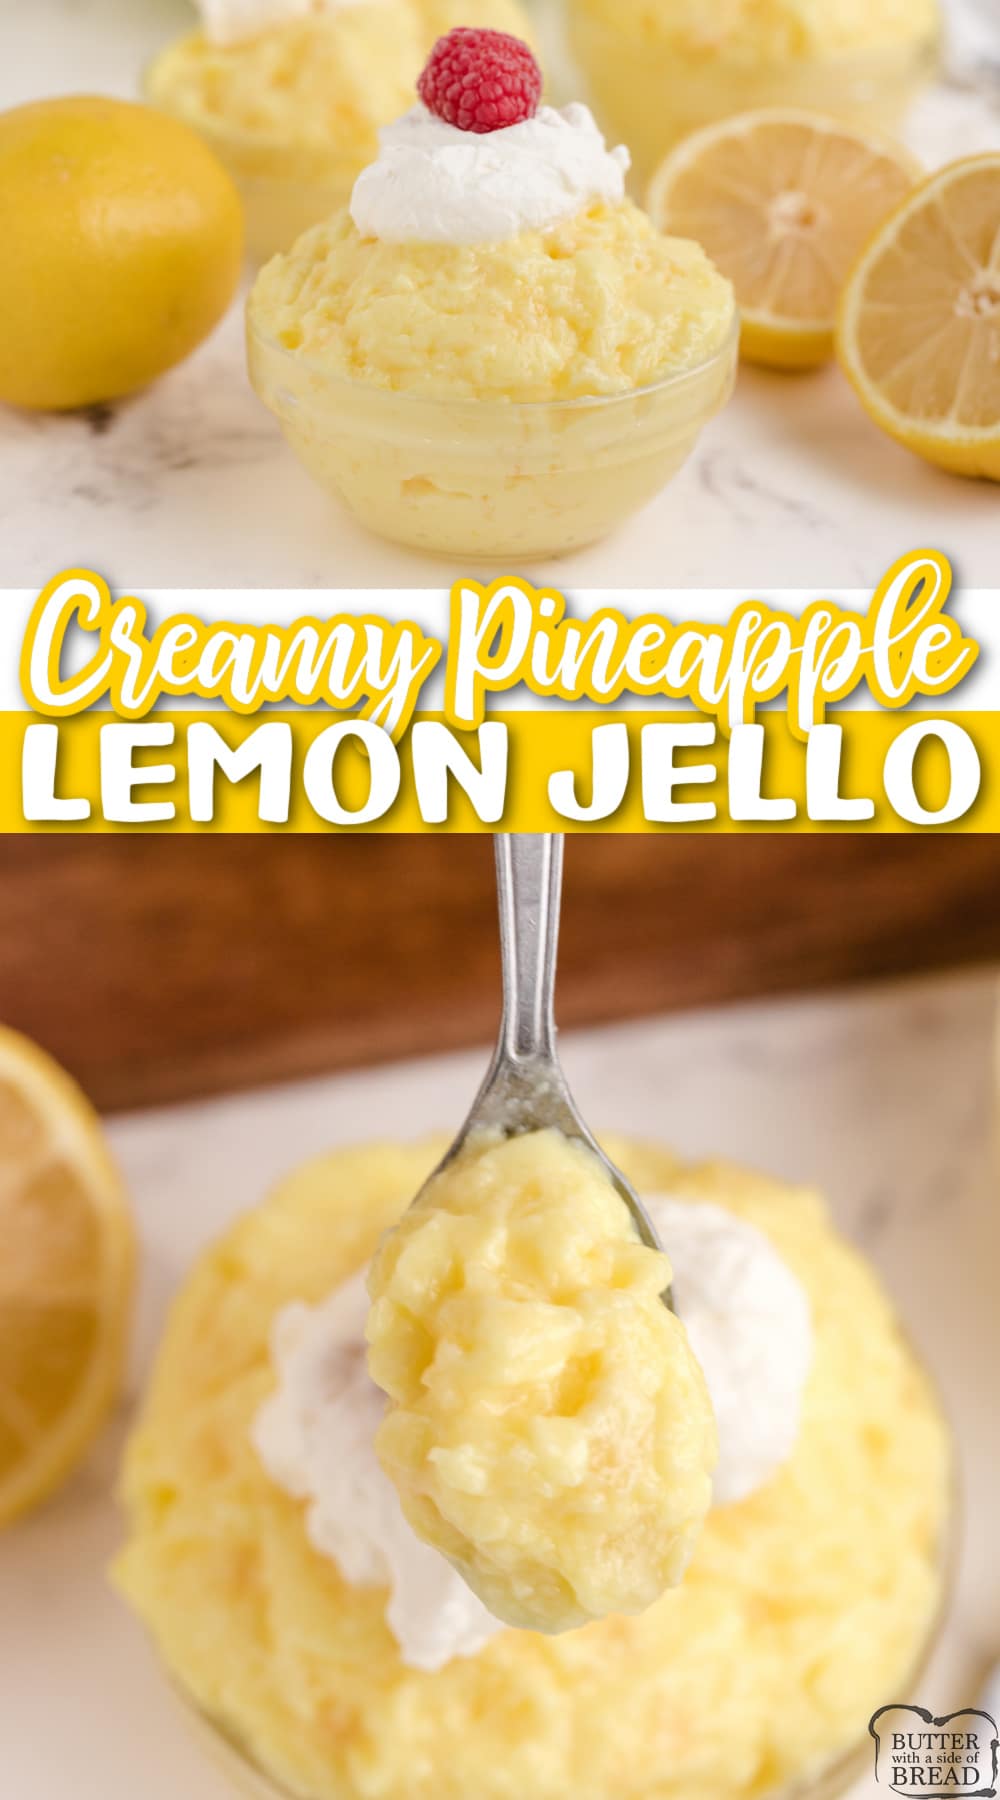 Creamy Pineapple Lemon Jello made with just 5 ingredients! This delicious jello recipe is made with lemon pudding, lemon jello and crushed pineapple.